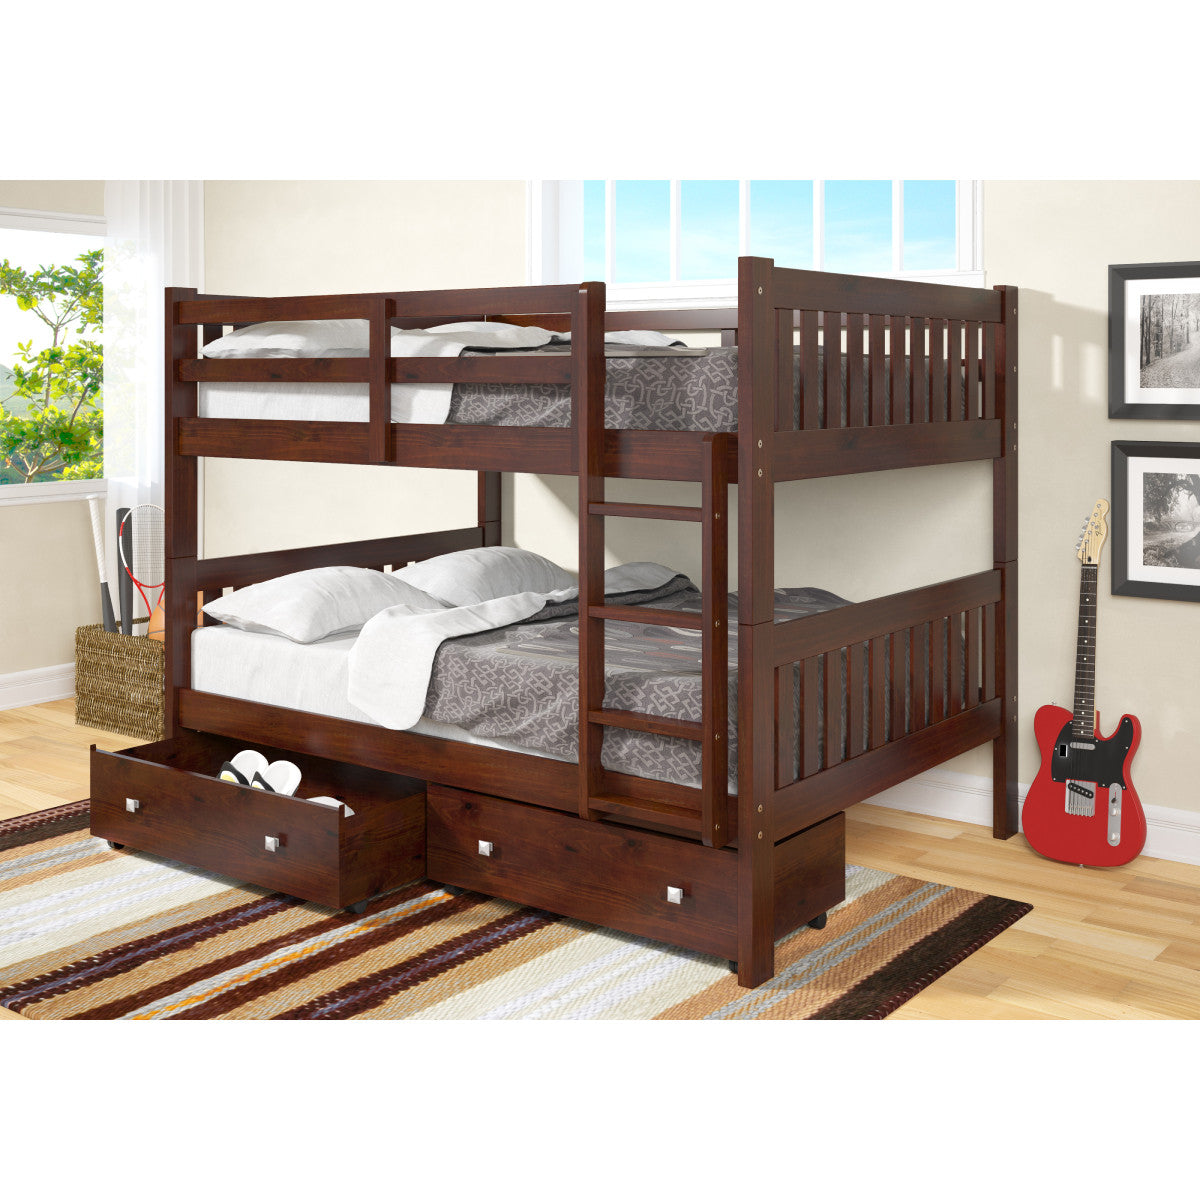 FULL/FULL MISSION BUNK BED WITH DUAL UNDERBED DRAWERS DARK CAPPUCCINO FINISH